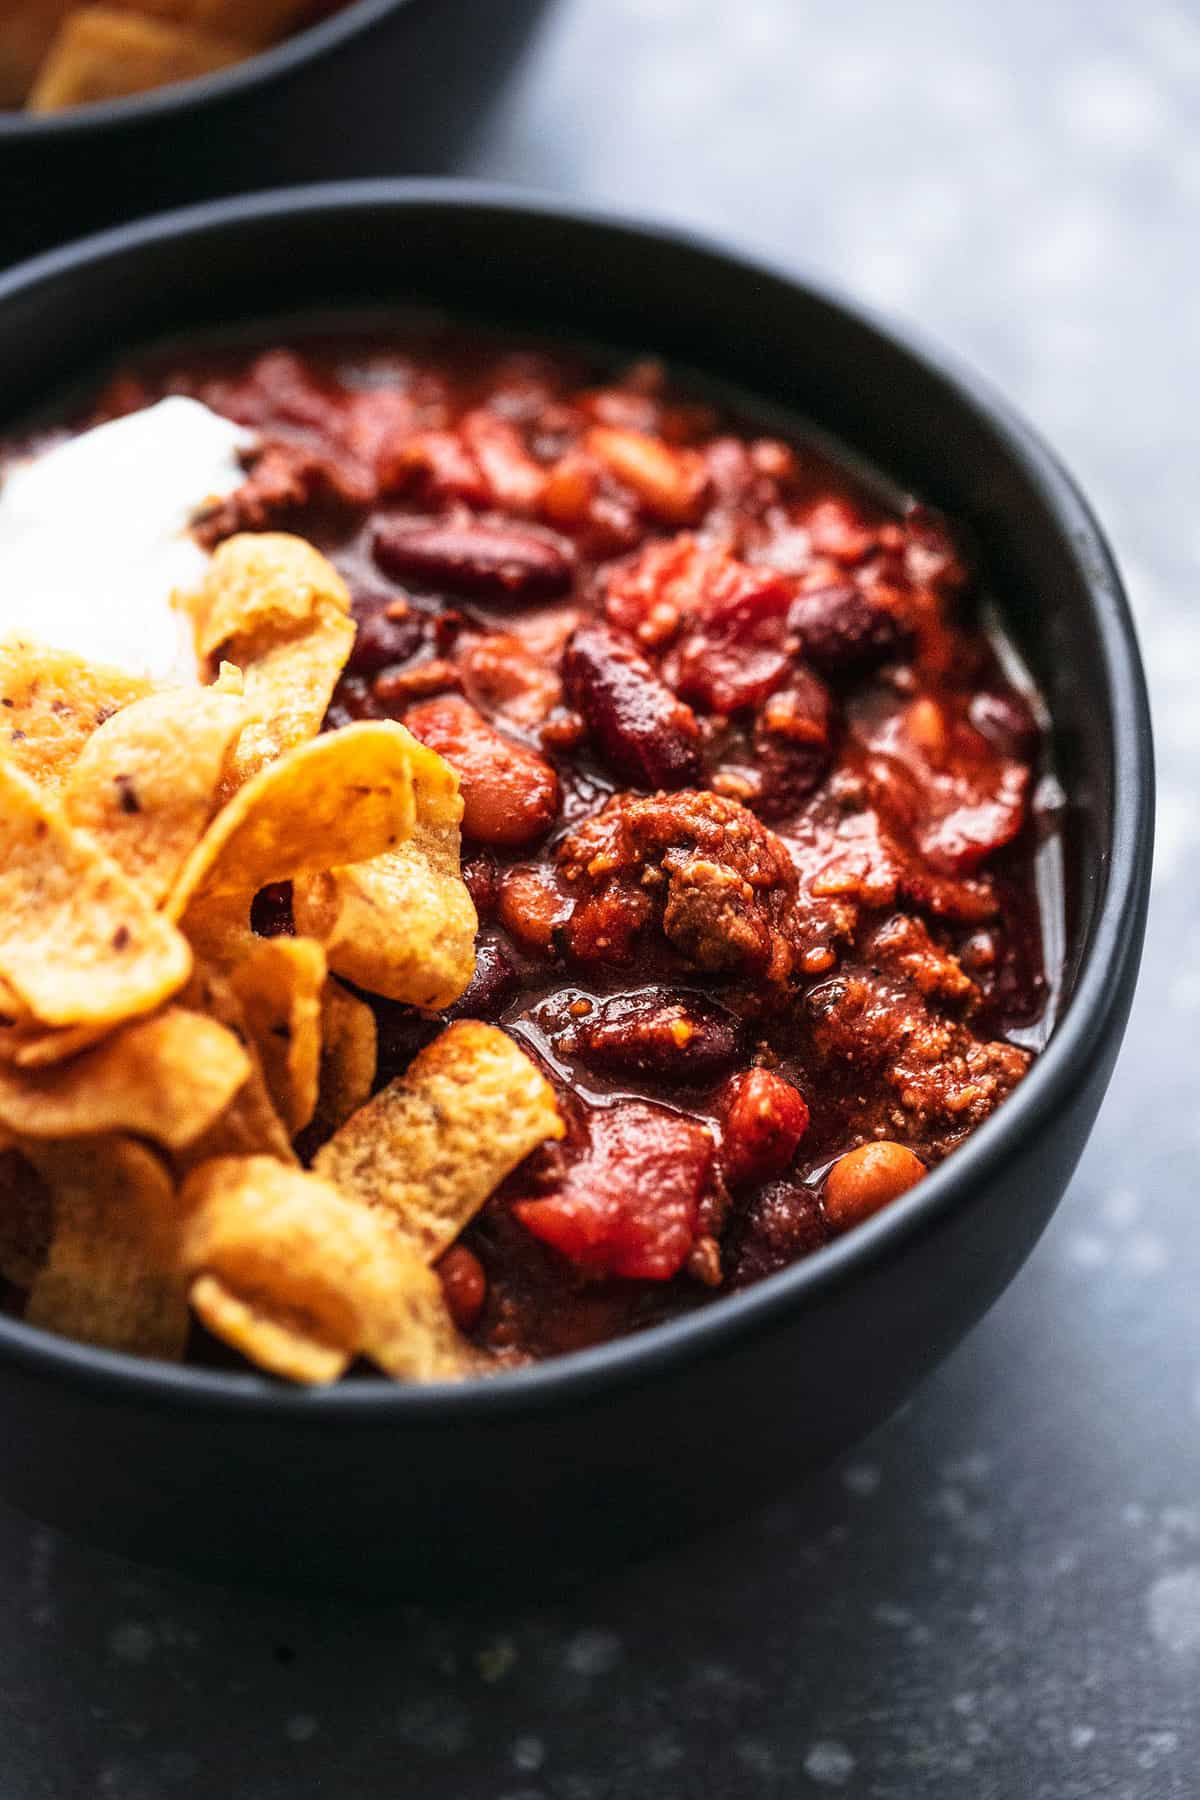 Instant Pot Chili - Courtney's Sweets